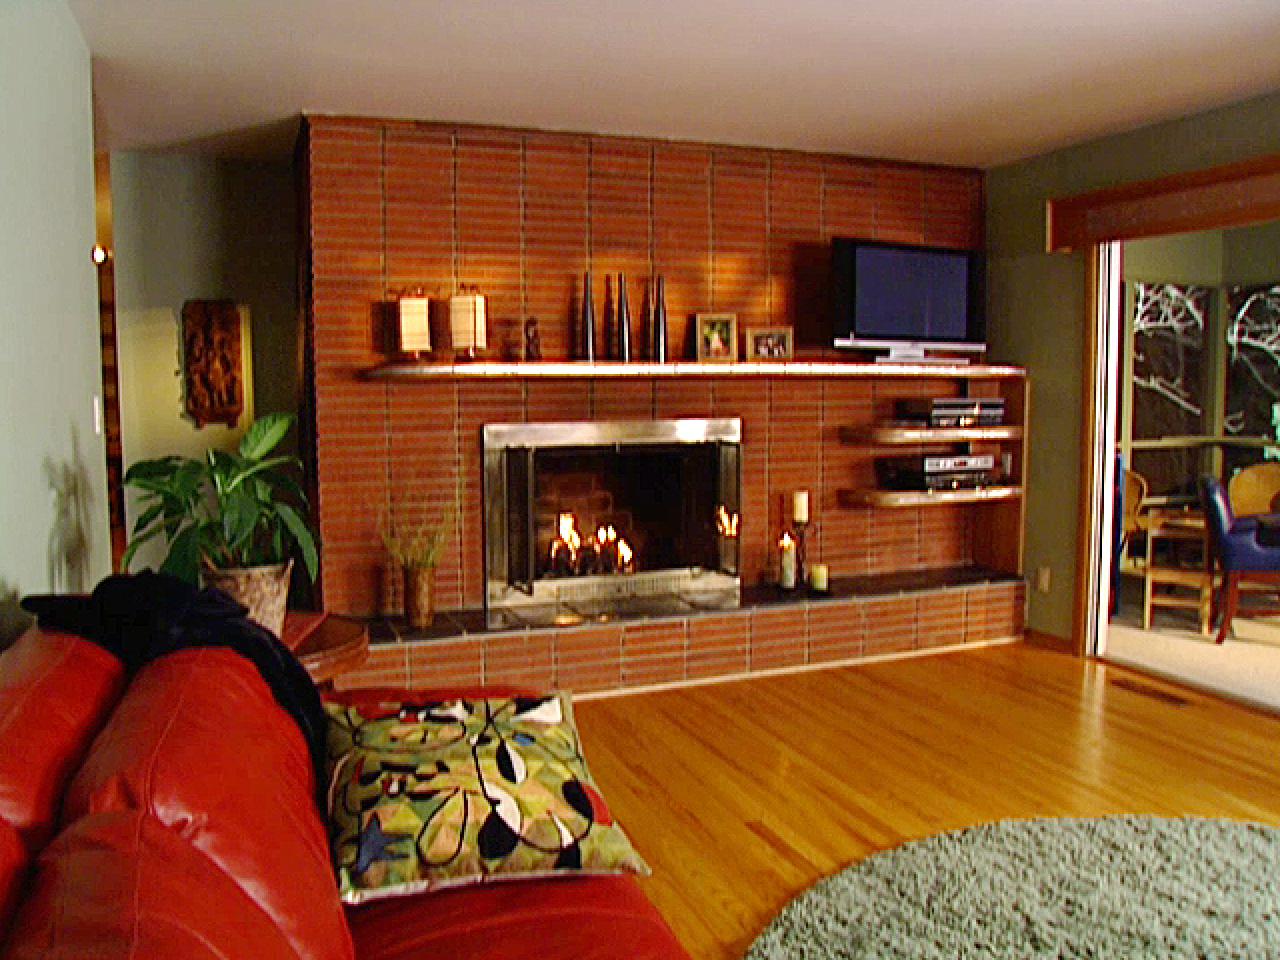 How To Install A Floating Mantel, Floating Mantel Brick Fireplace